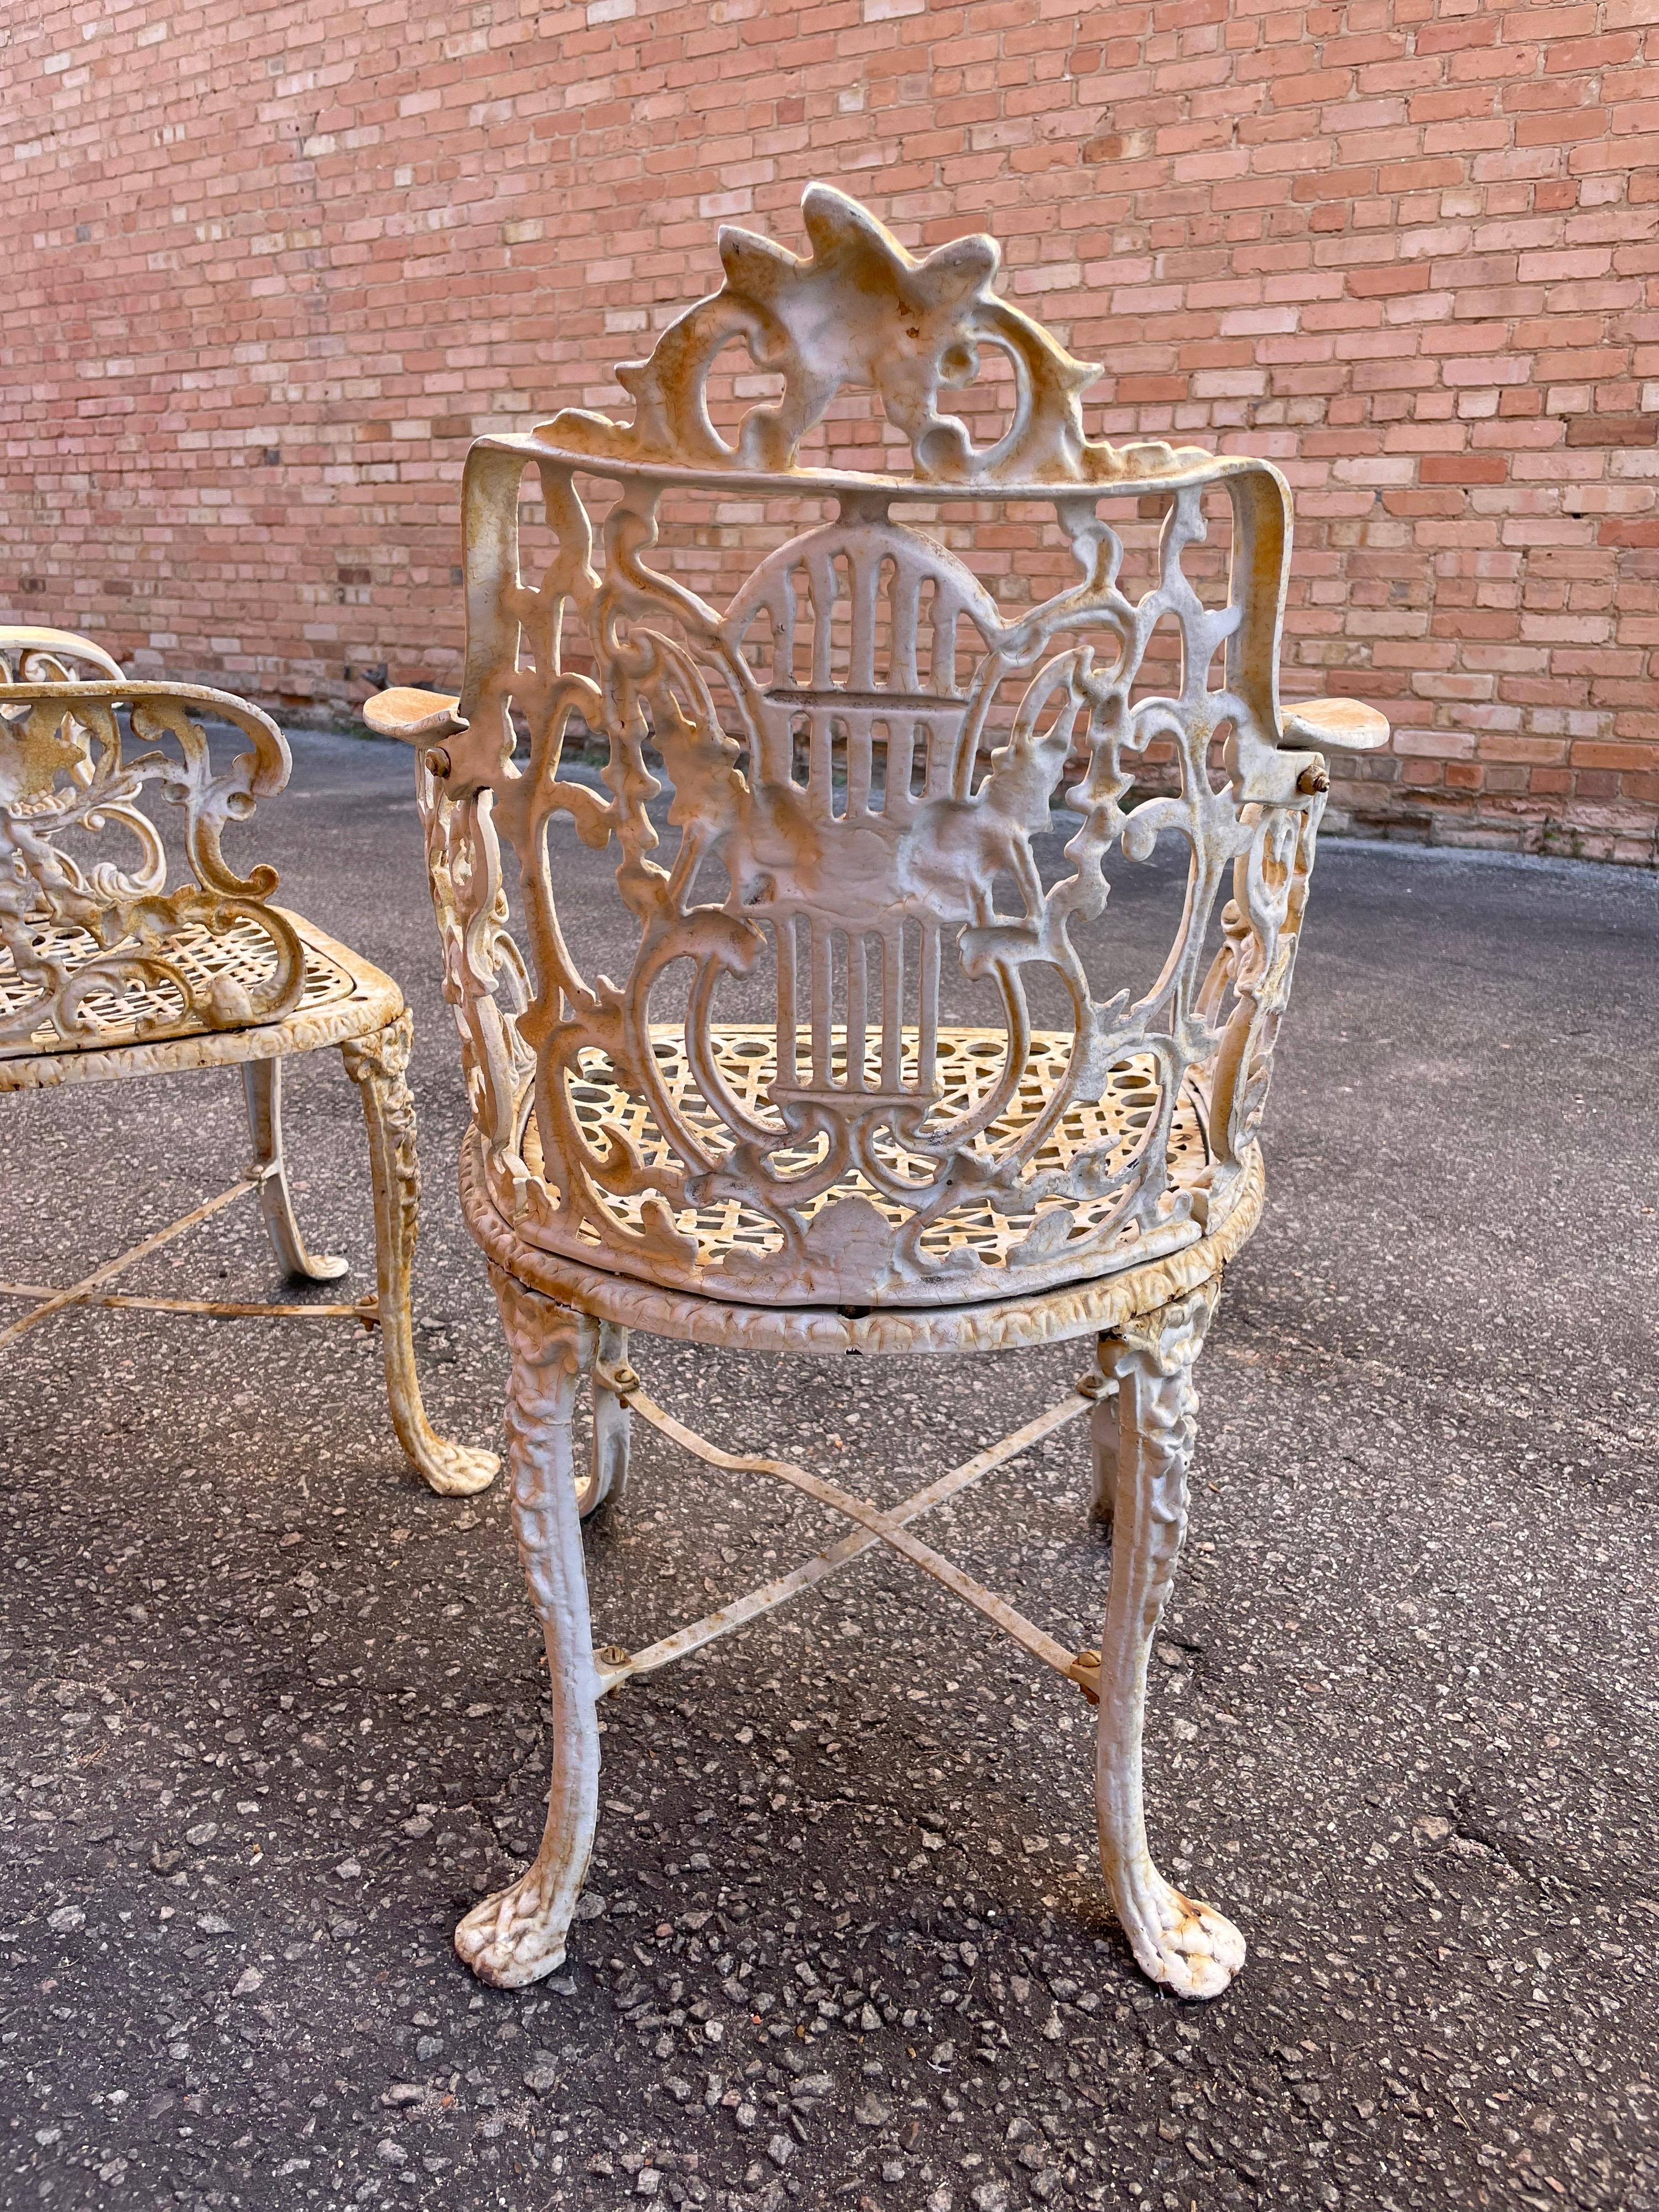 1860s Antique Neoclassical Robert Wood Cast Iron Chairs, a Pair For Sale 5